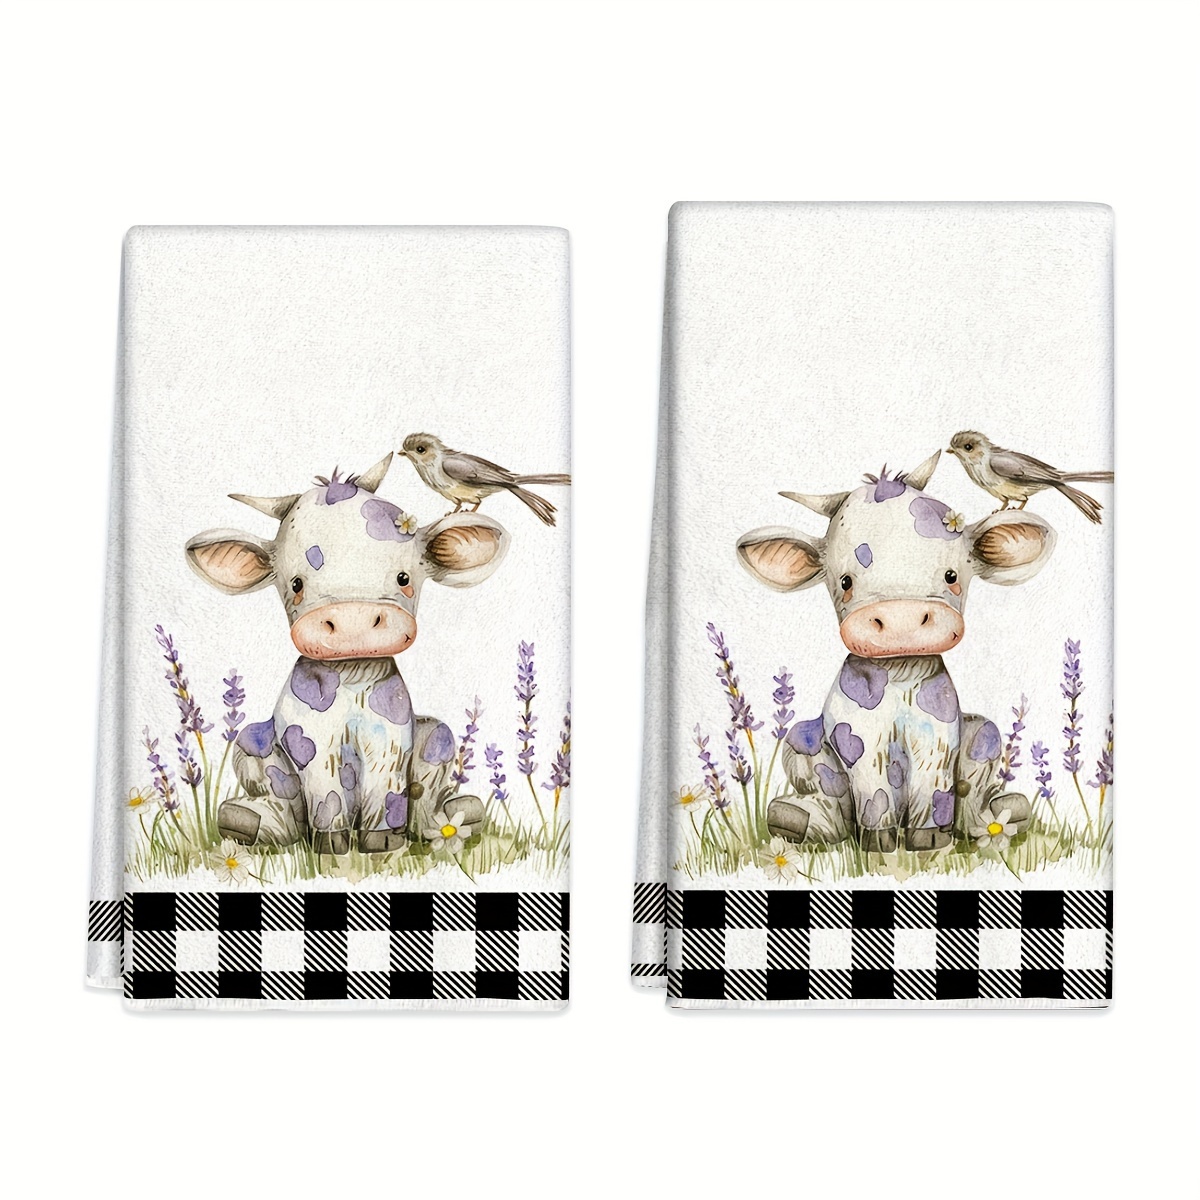 

2pcs, Hand Towel, Cute Cow Kitchen Decorative Dish Towels, Absorbent Cloth Tea Towels For Cooking, Baking, Housewarming Gifts, Cleaning Supplies, Bathroom Supplies